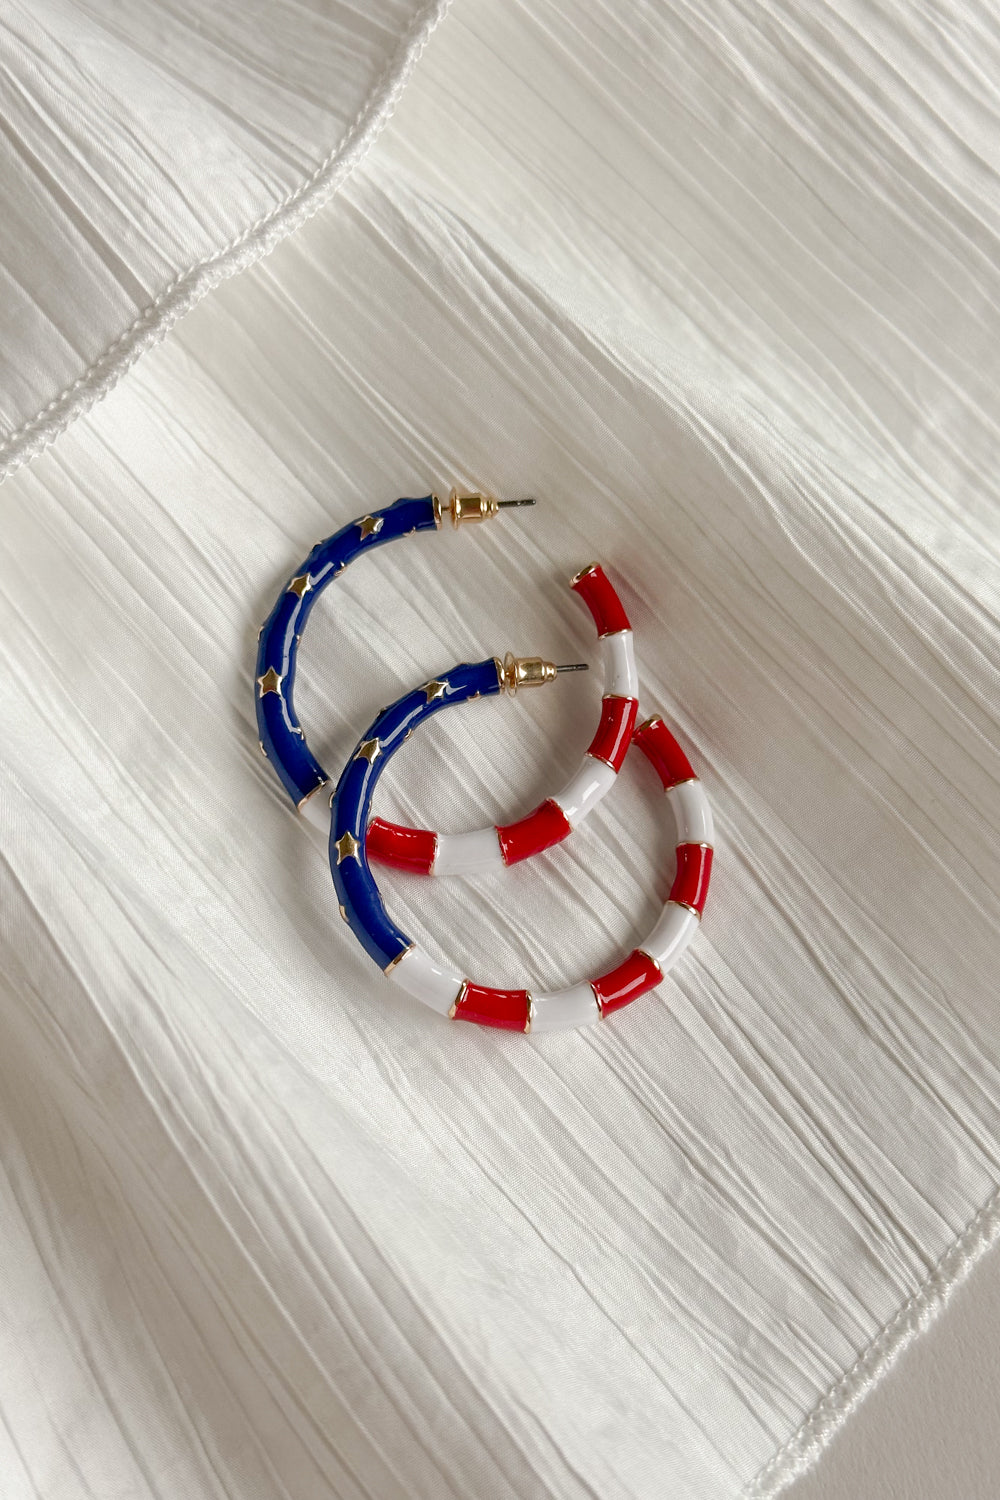 Image shows Eleanor Red, White, & Blue Hoop Earrings on top of each other against a white background. Earrings feature red and white striped and a blue section with gold stars.